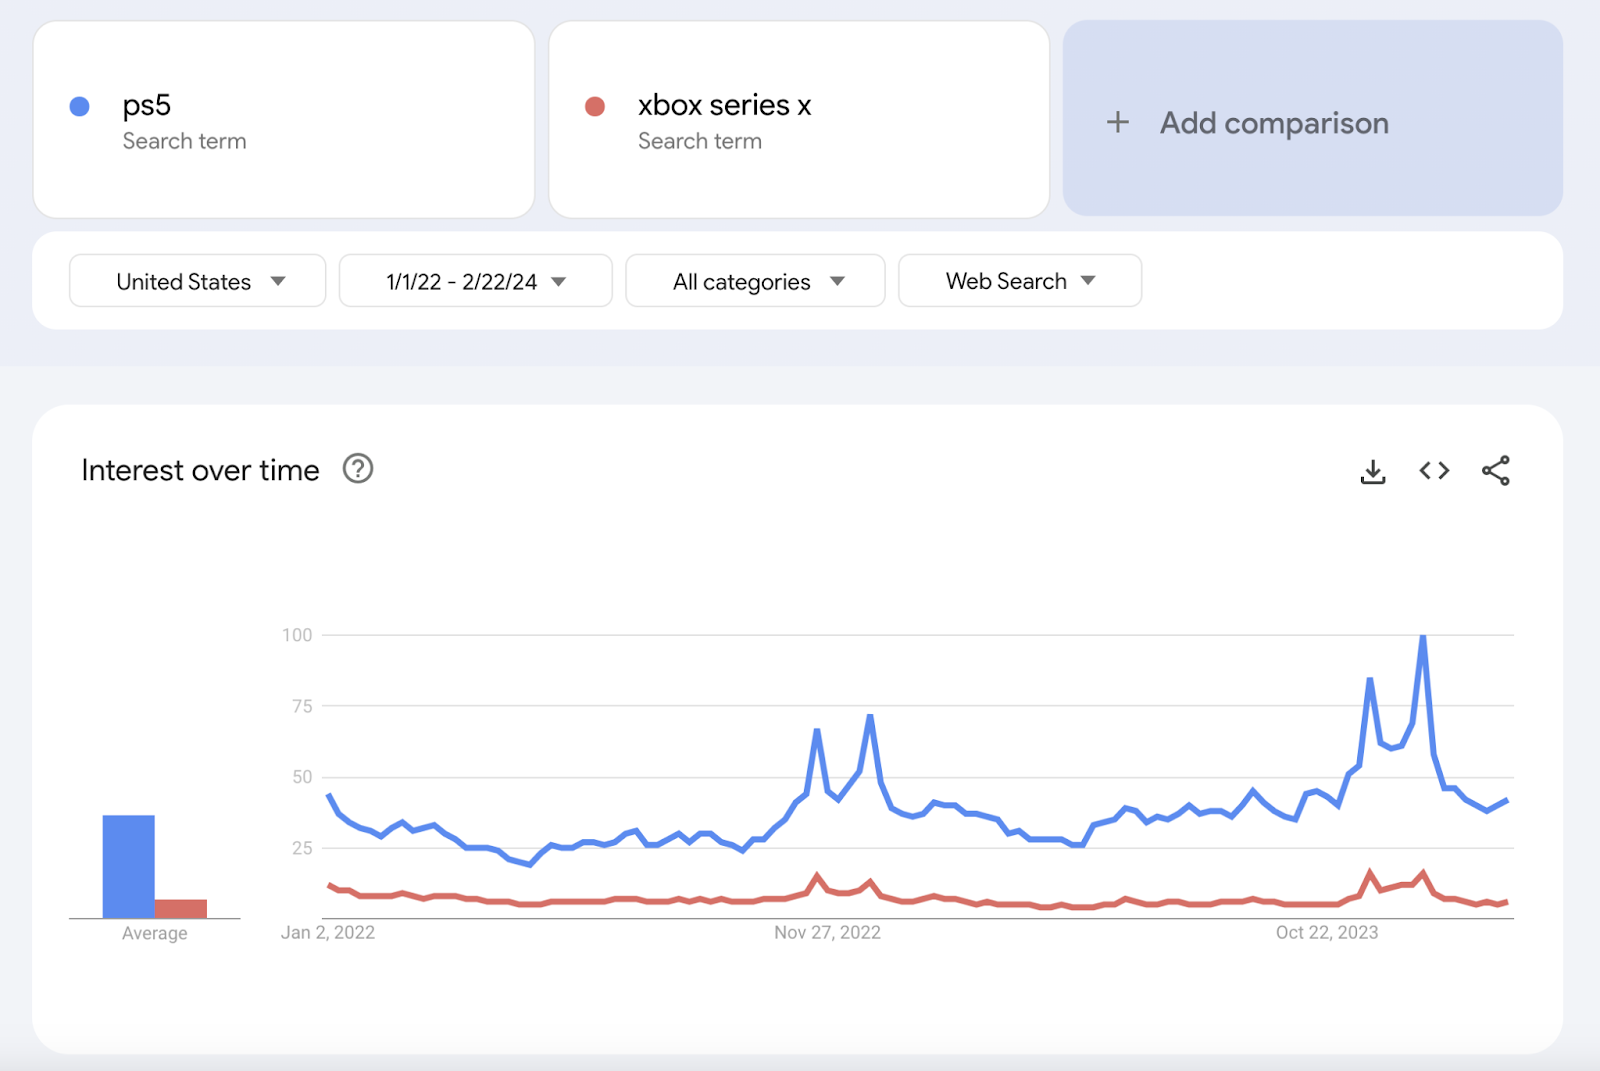 Google Trends "interest implicit    time" graphs comparing "ps5," and "xbox bid    x" queries